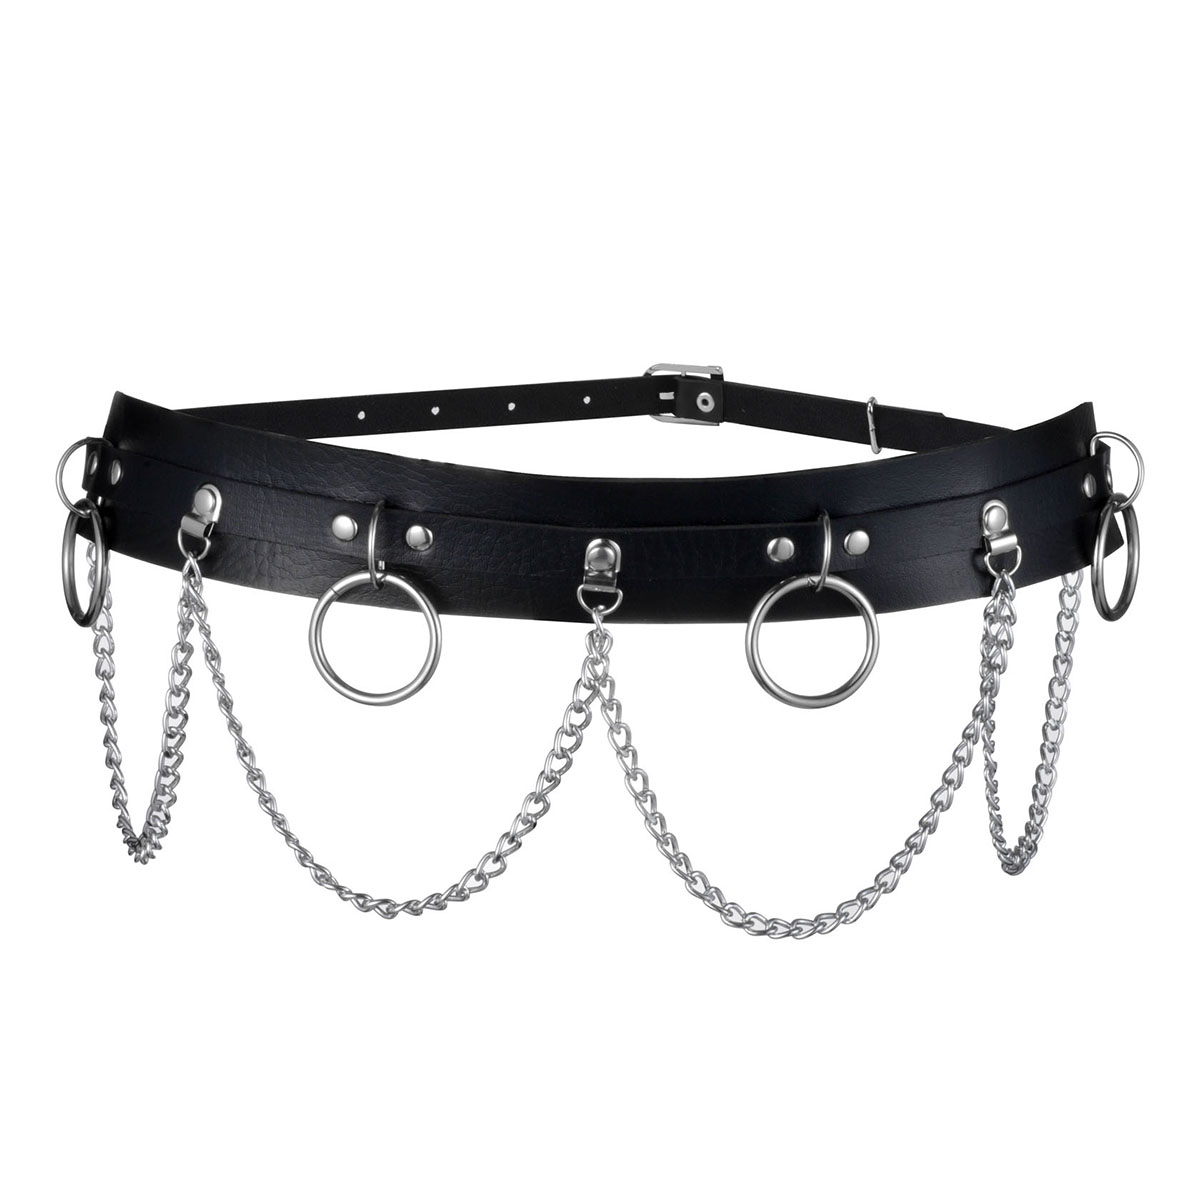 Punk leather belly chains gothic waist chain layered ring belt body jewelry accessories